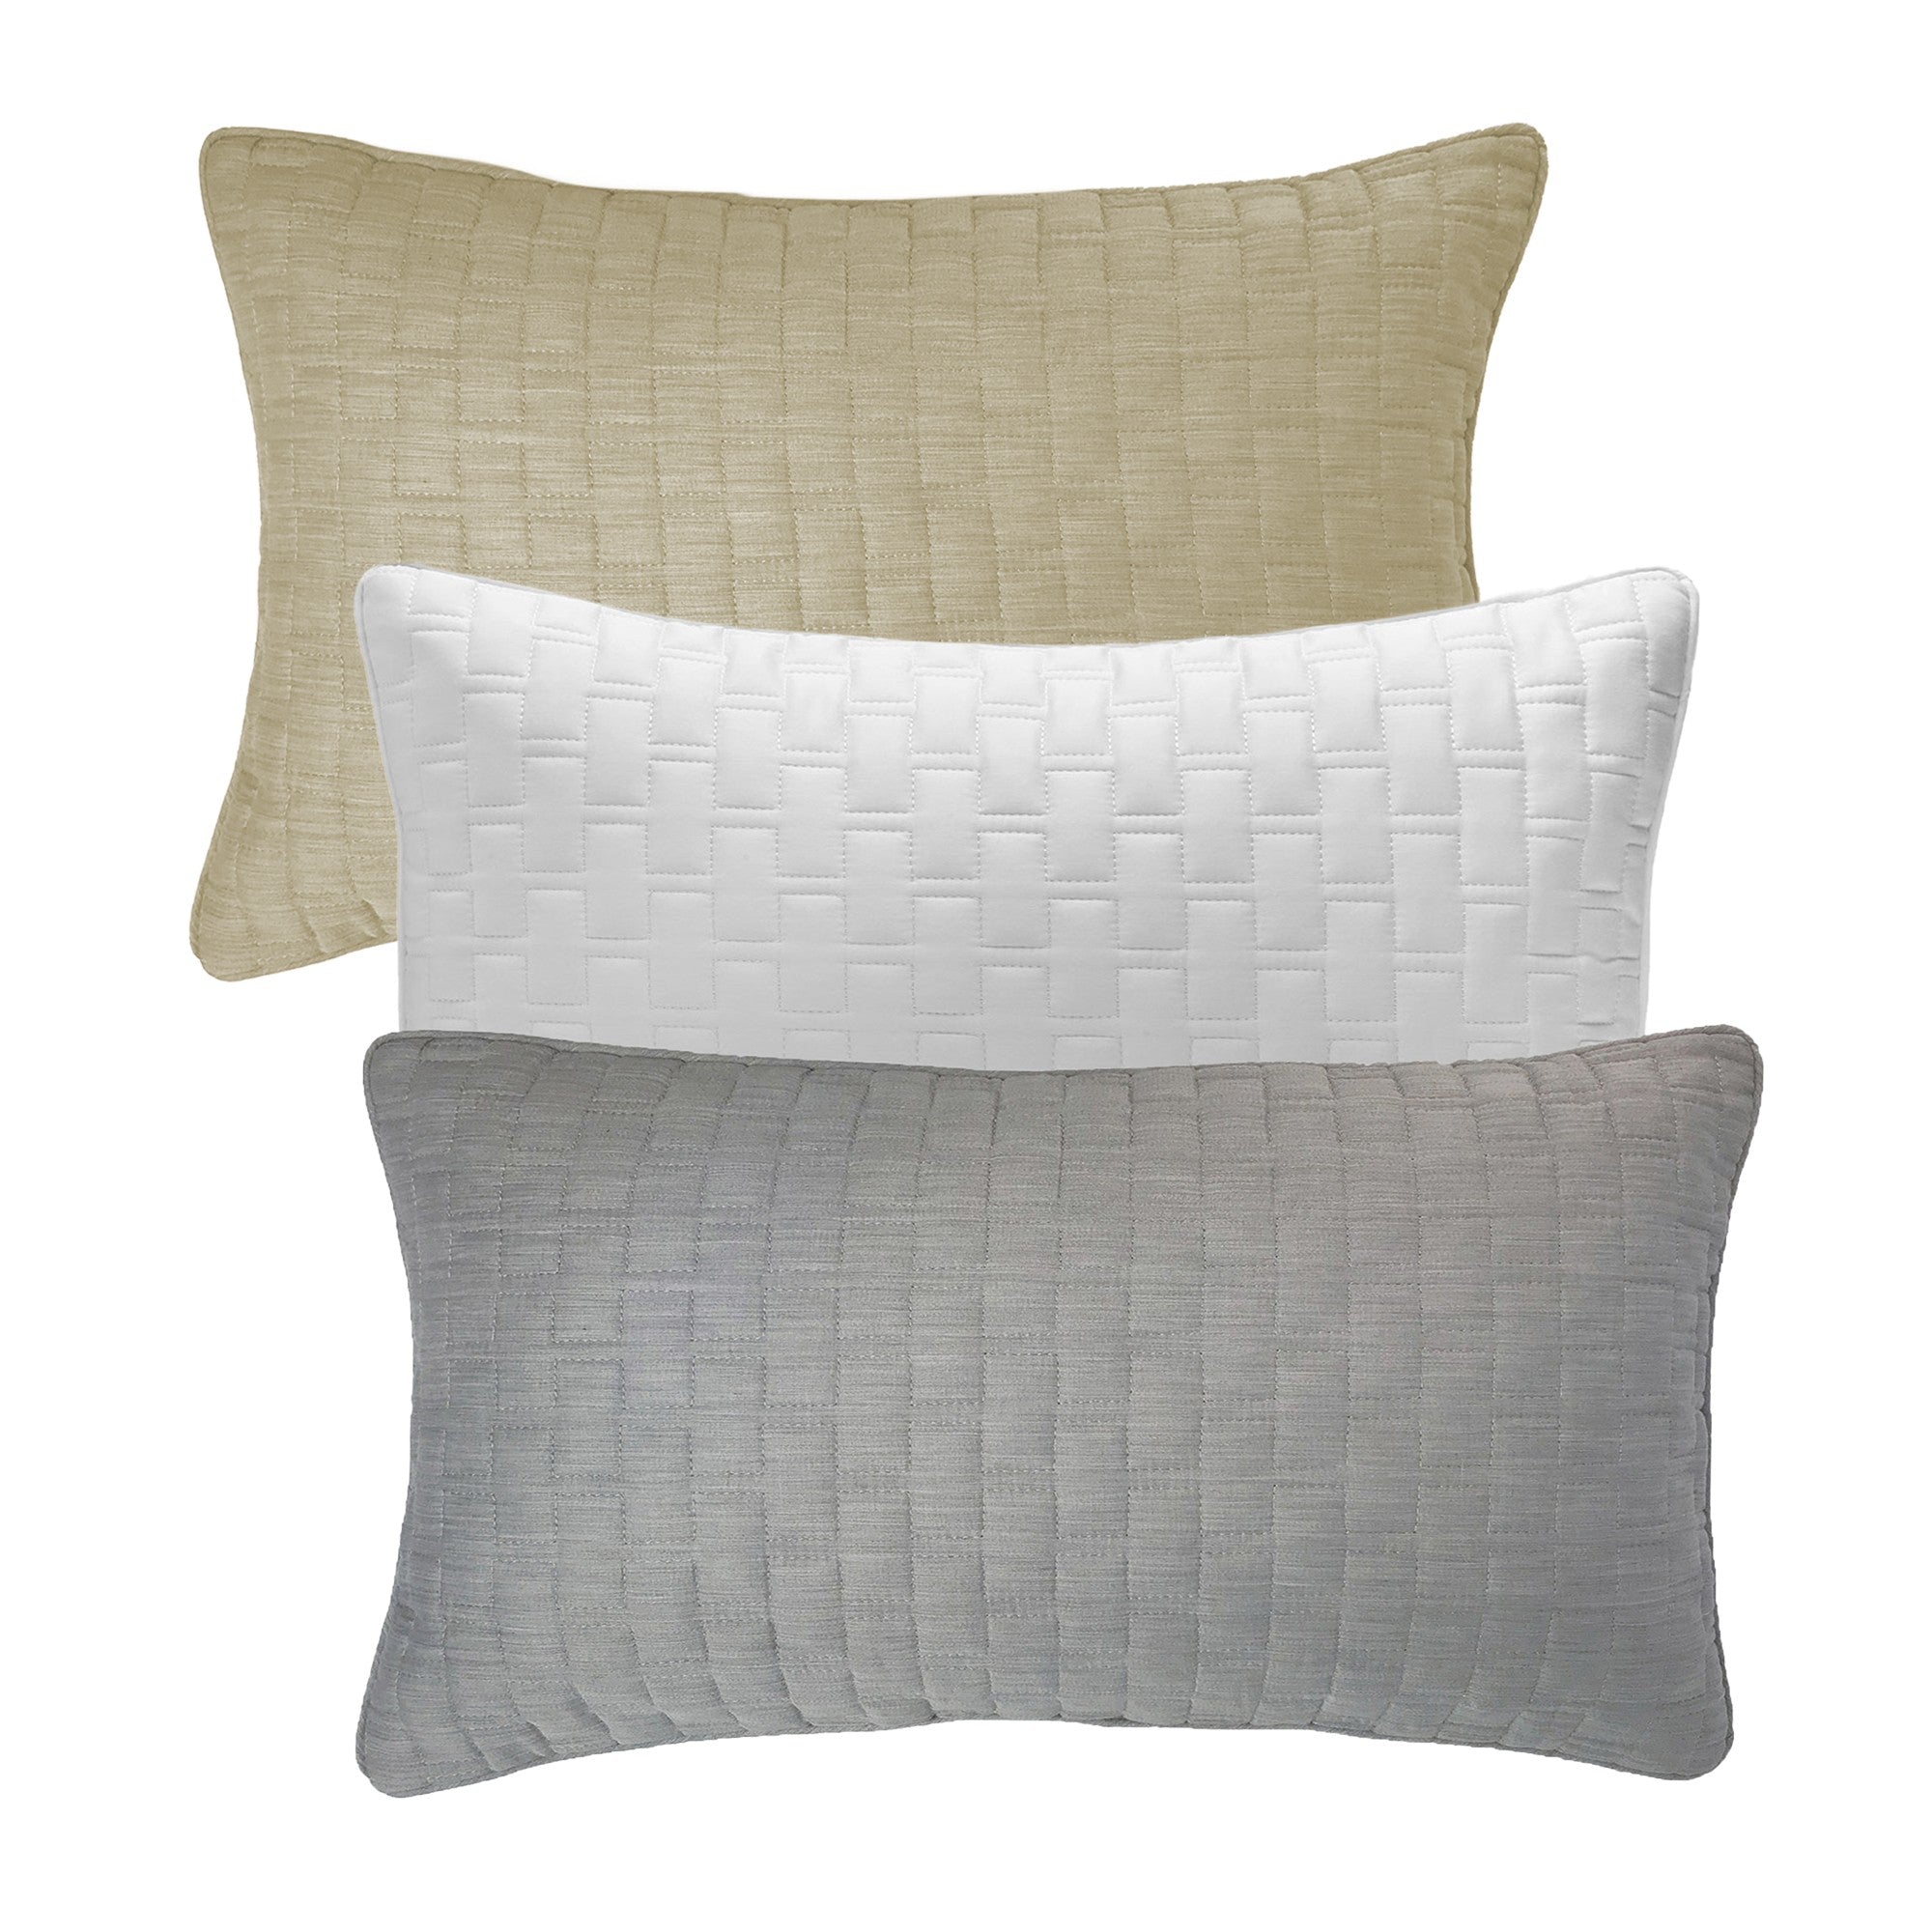 MELANGE Quilted Decorative Pillow - Rich, Cozy Comfortable Pillow Cover Sets - Smooth Fibers Good for All Skin Types - Silver